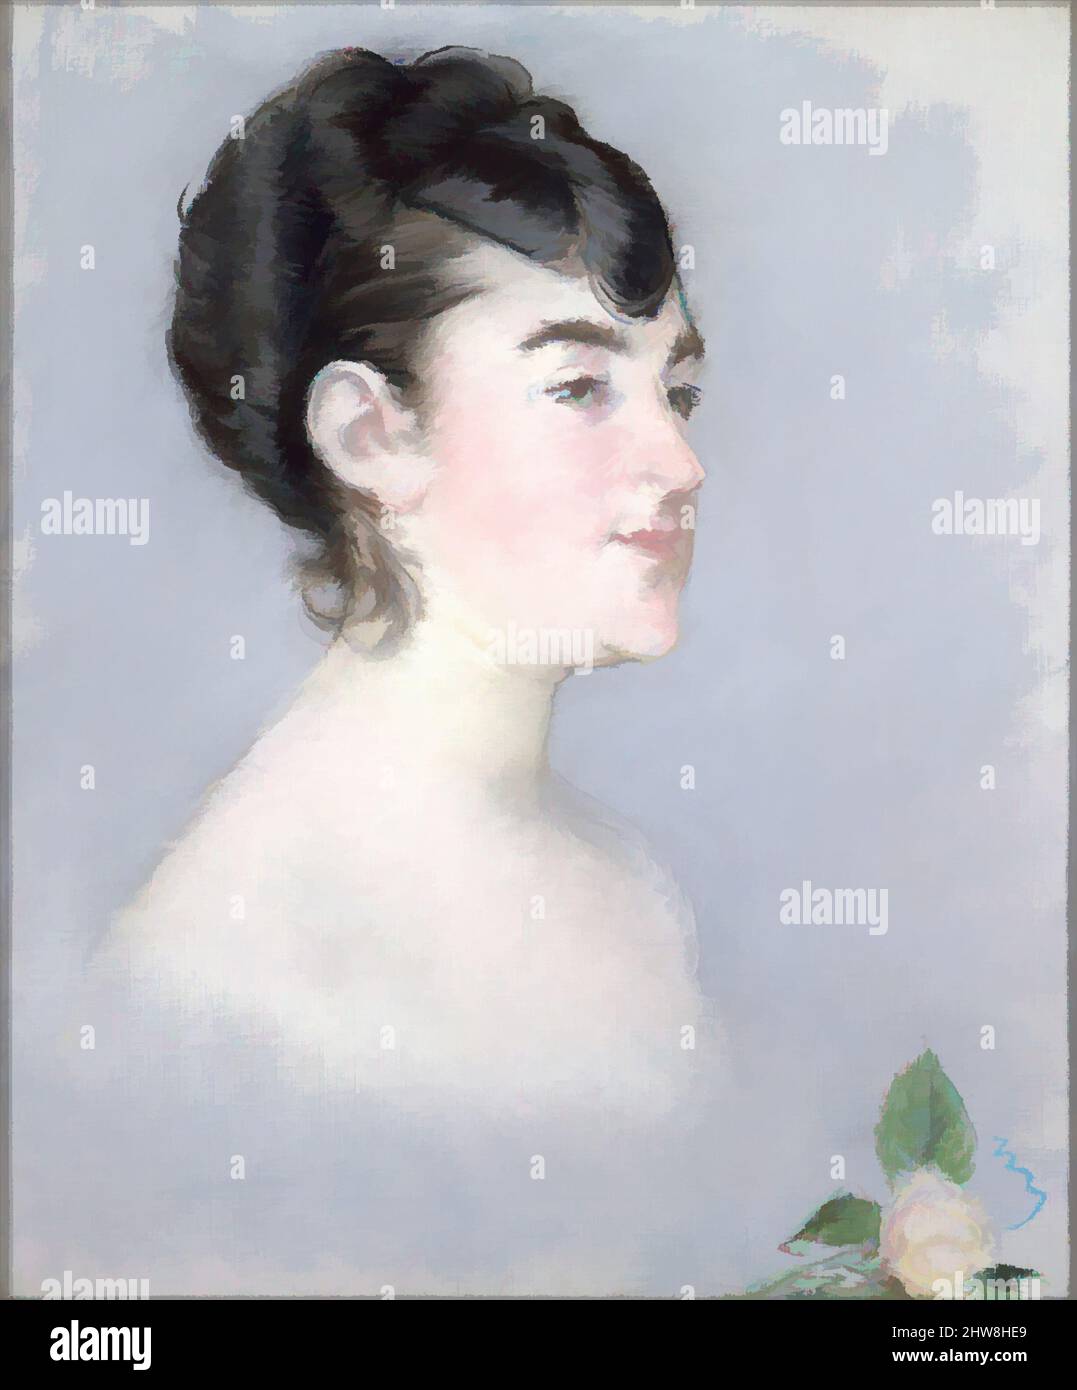 Art inspired by Mademoiselle Isabelle Lemonnier (1857–1926), 1879–82, Pastel on canvas, 22 x 18 1/4 in. (55.9 x 46.4 cm), Drawings, Édouard Manet (French, Paris 1832–1883 Paris), Isabelle Lemonnier was the daughter of a successful Parisian jeweler and the younger sister of Marguerite, Classic works modernized by Artotop with a splash of modernity. Shapes, color and value, eye-catching visual impact on art. Emotions through freedom of artworks in a contemporary way. A timeless message pursuing a wildly creative new direction. Artists turning to the digital medium and creating the Artotop NFT Stock Photo